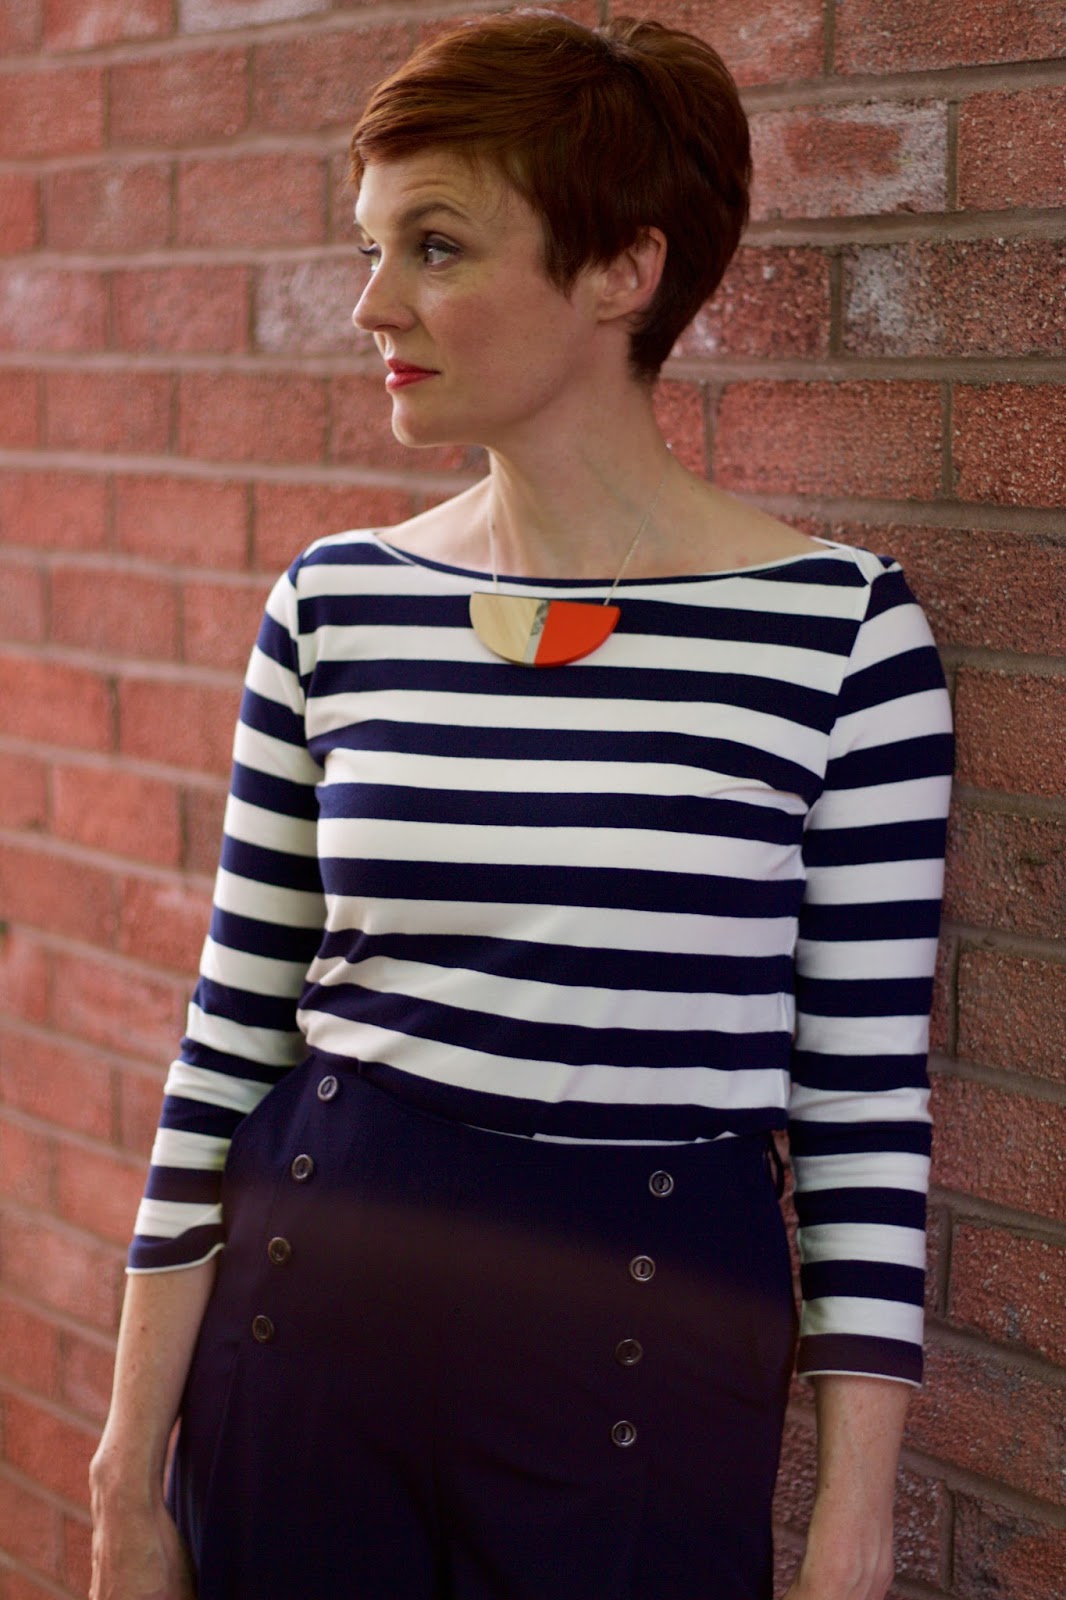 Classic Breton Top & Navy Culottes | Nautical Style, over 40 